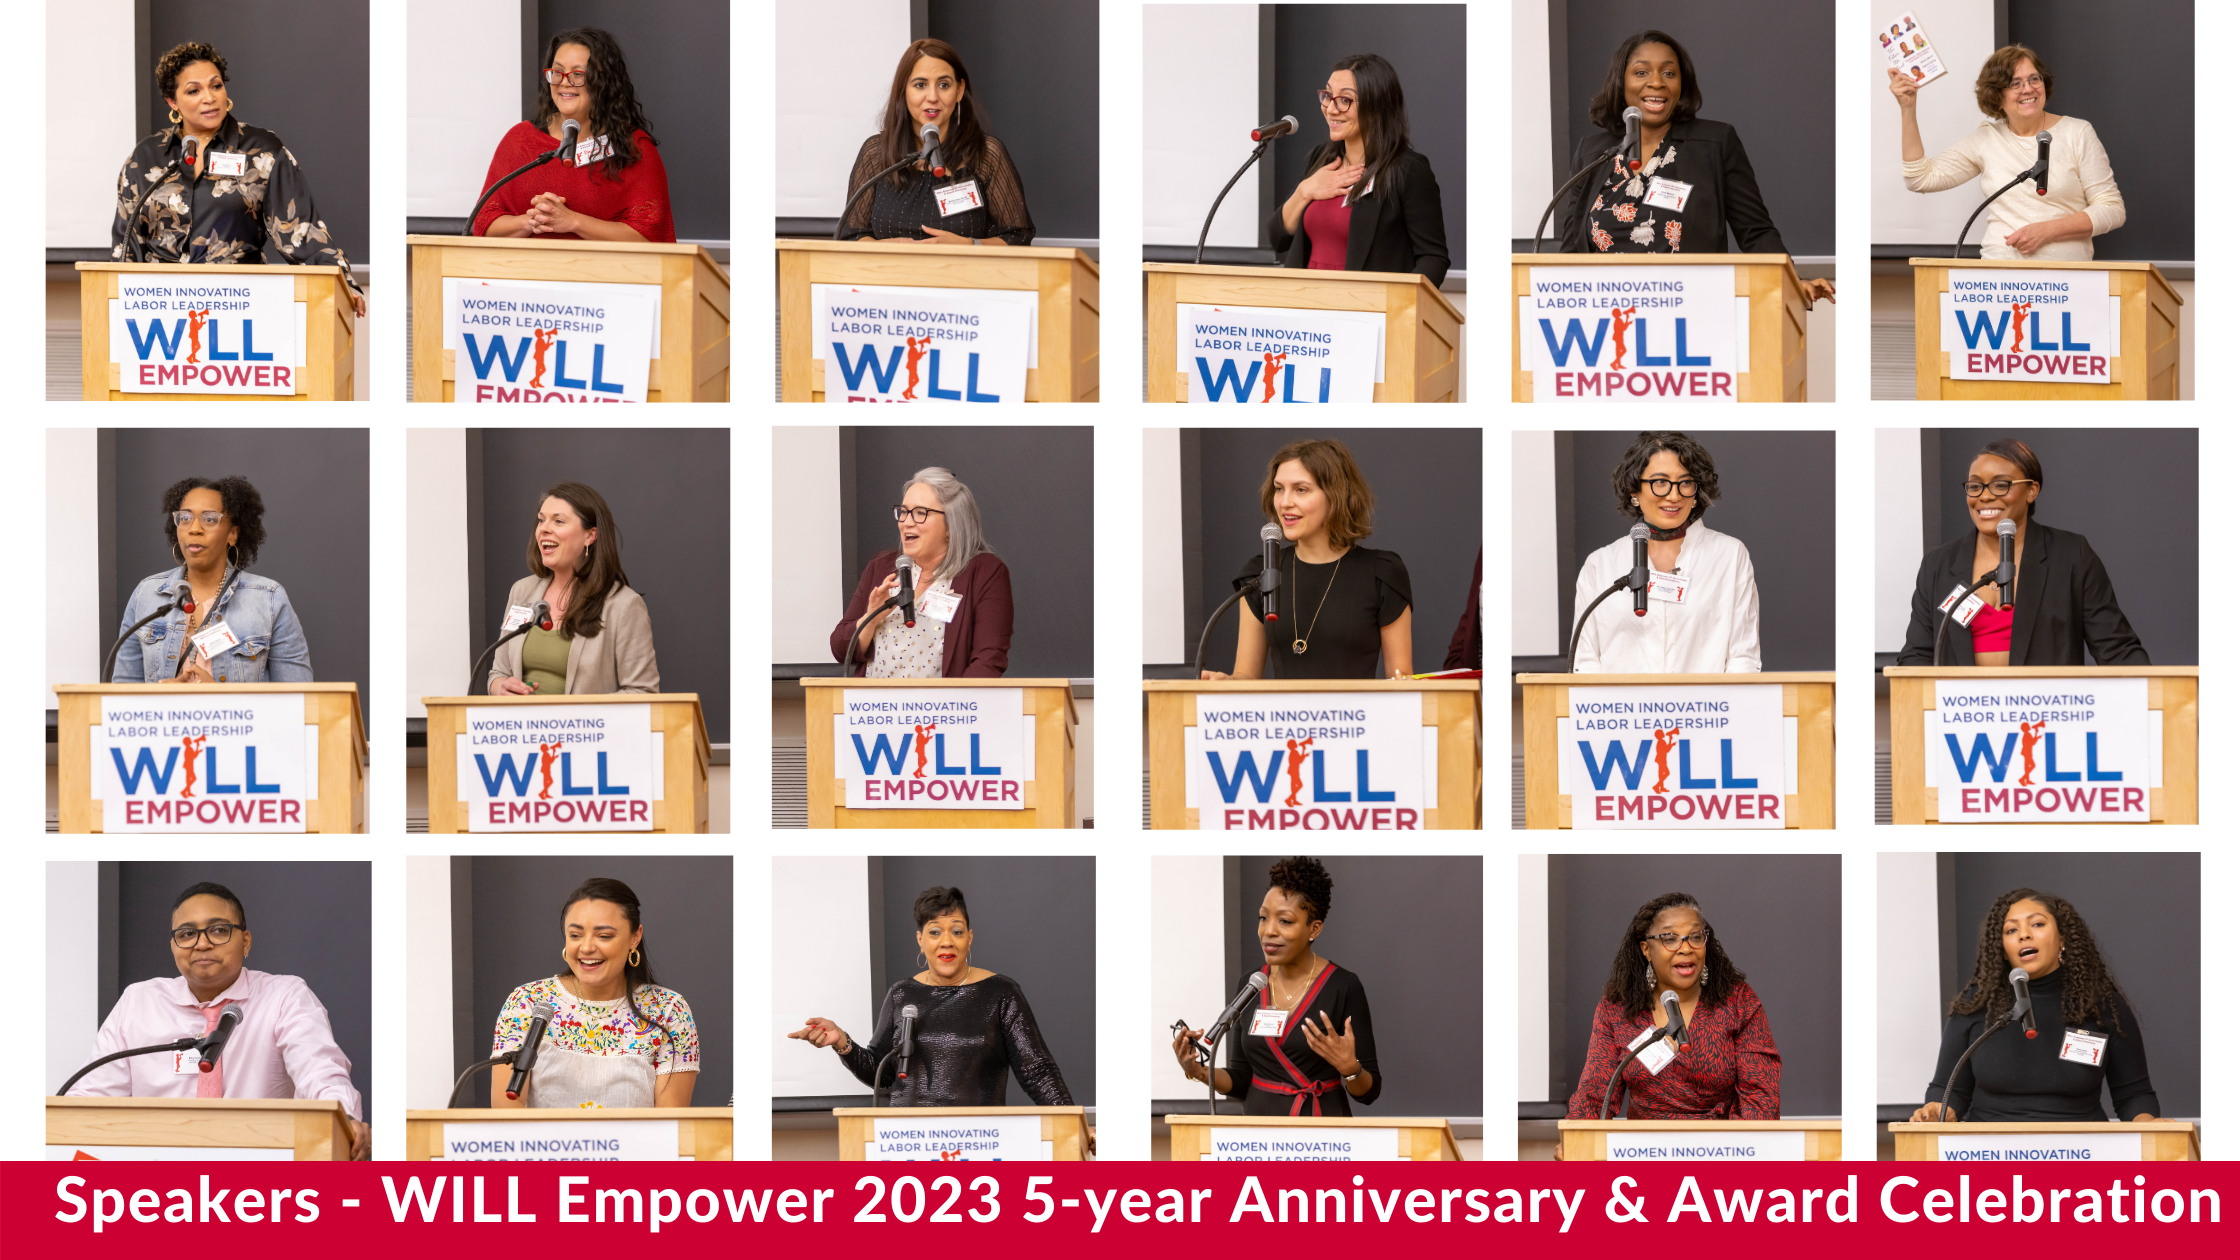 Image of speakers at WILL Empower Anniversary Celebration